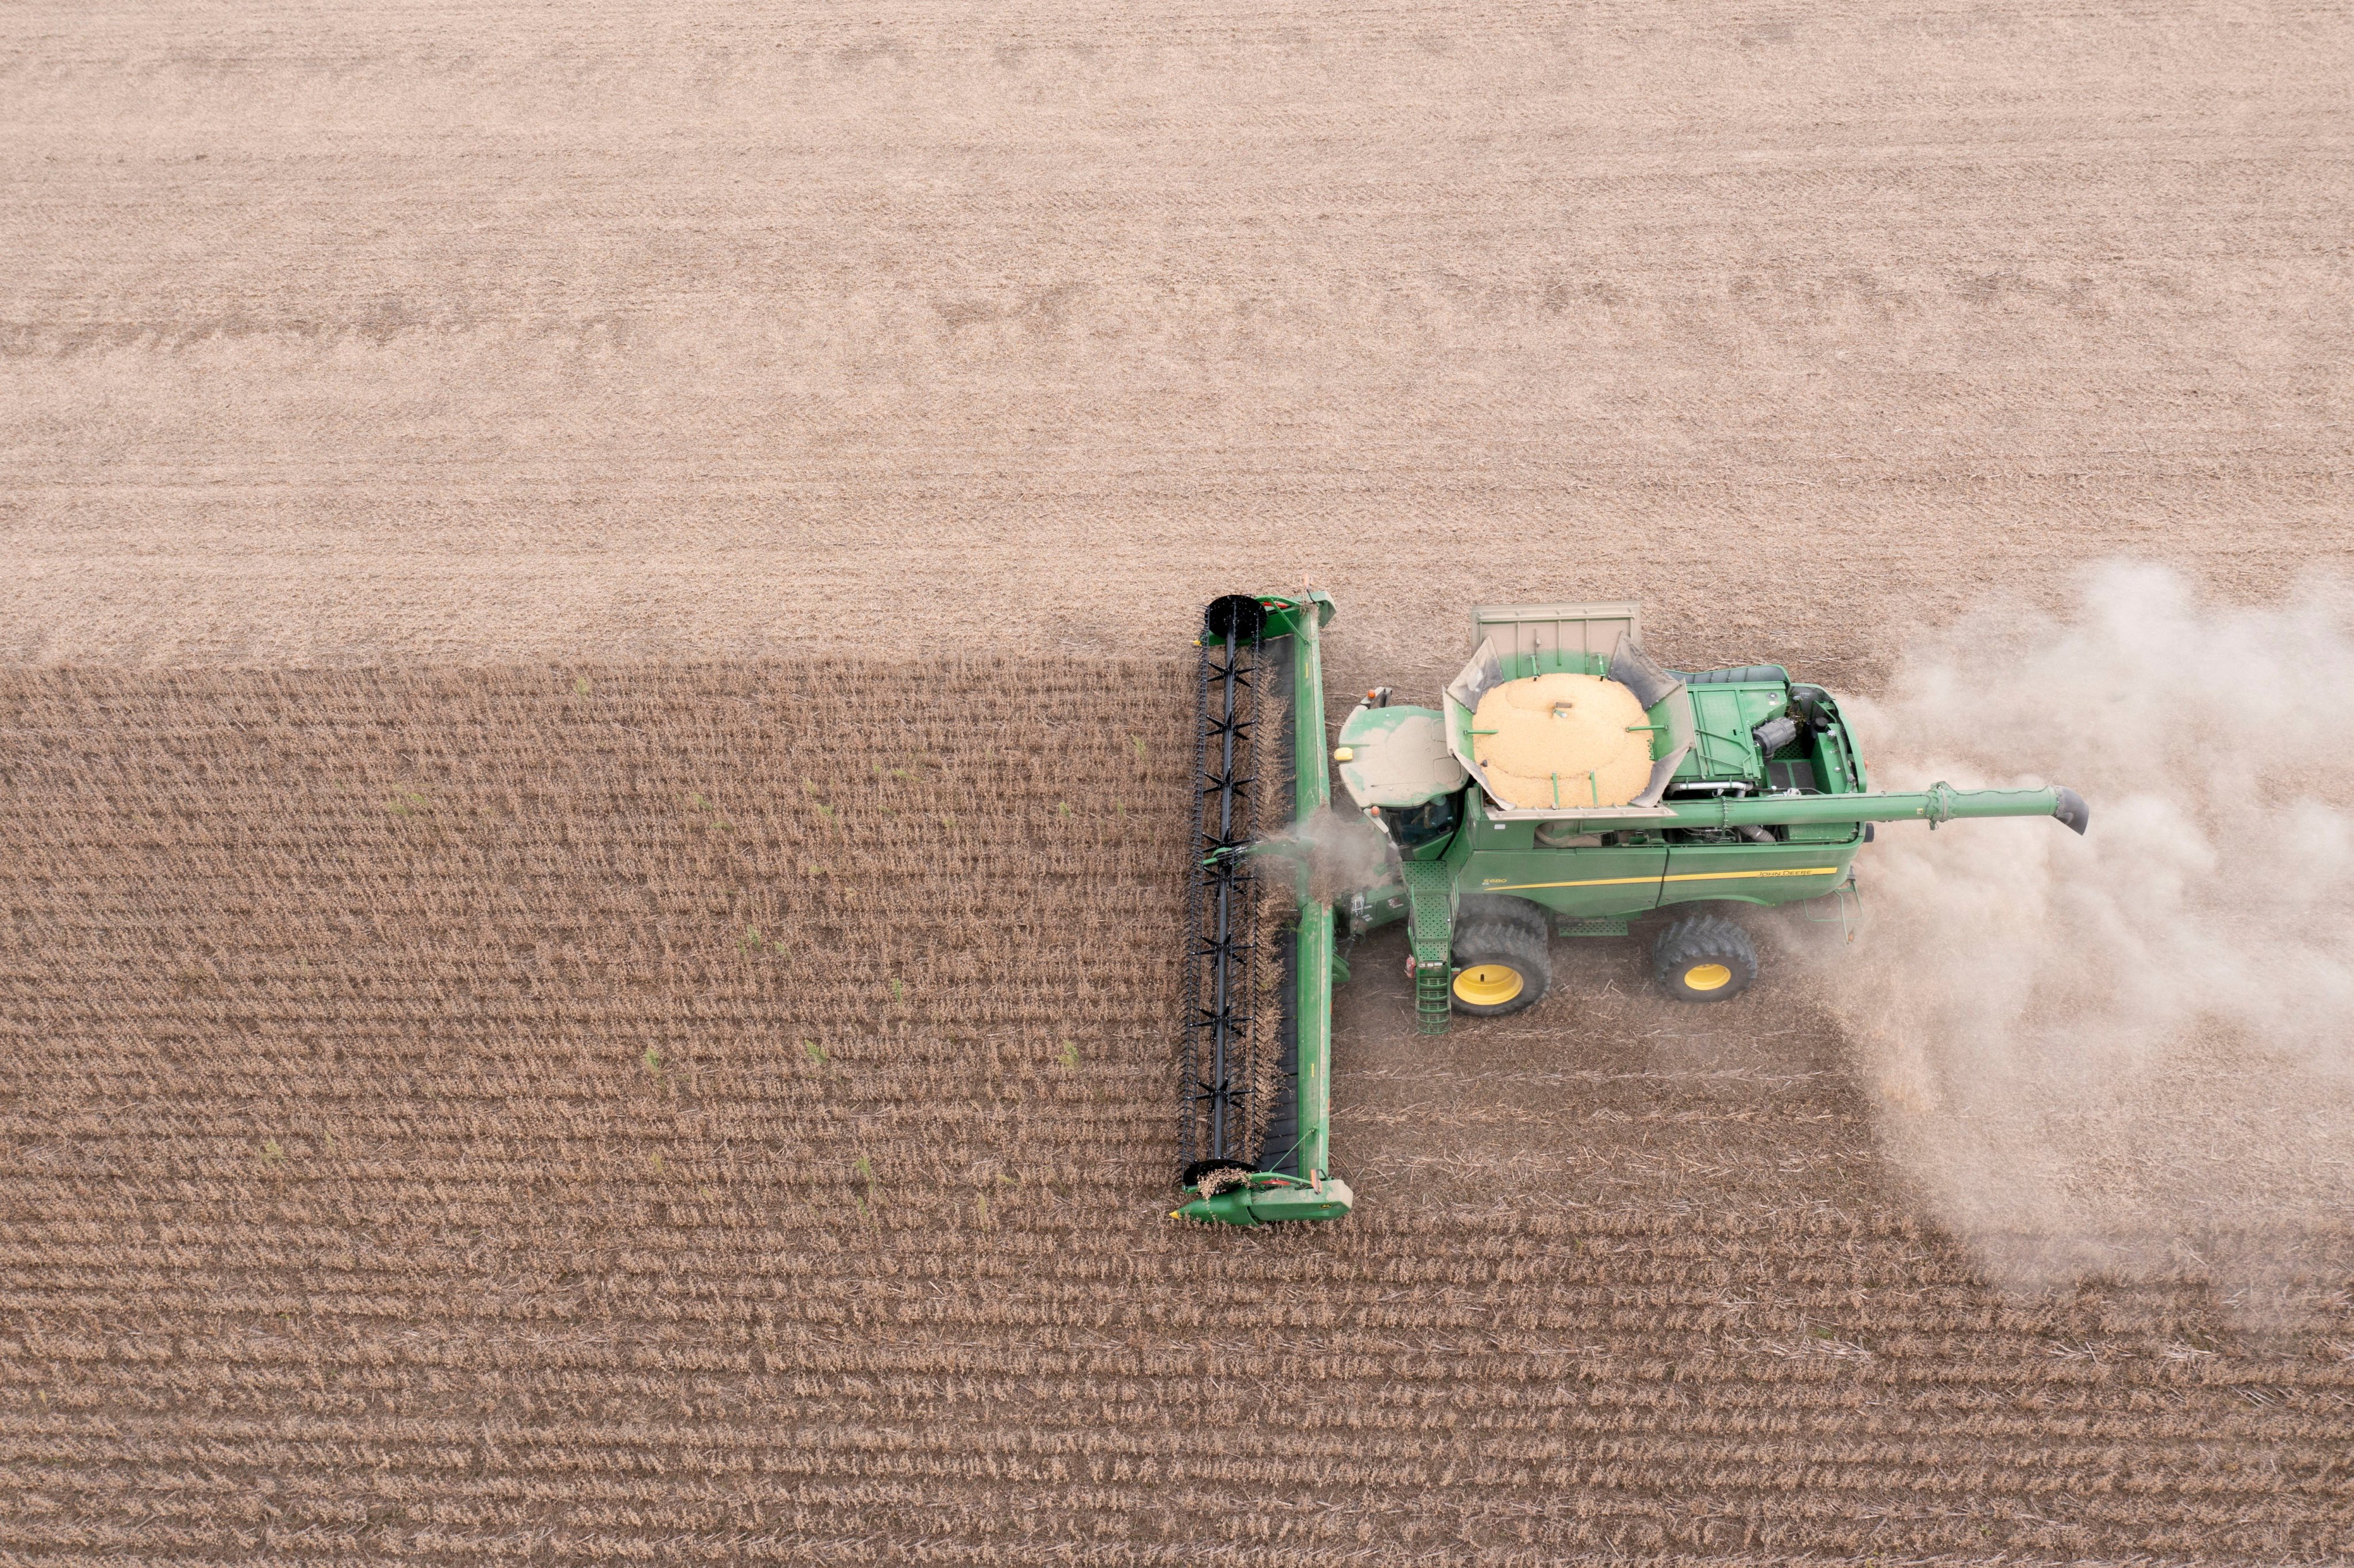 An aerial view of a tractor harvesting soybeans in Deerfield, Ohio, US, on October 7, 2021. Photo: Reuters